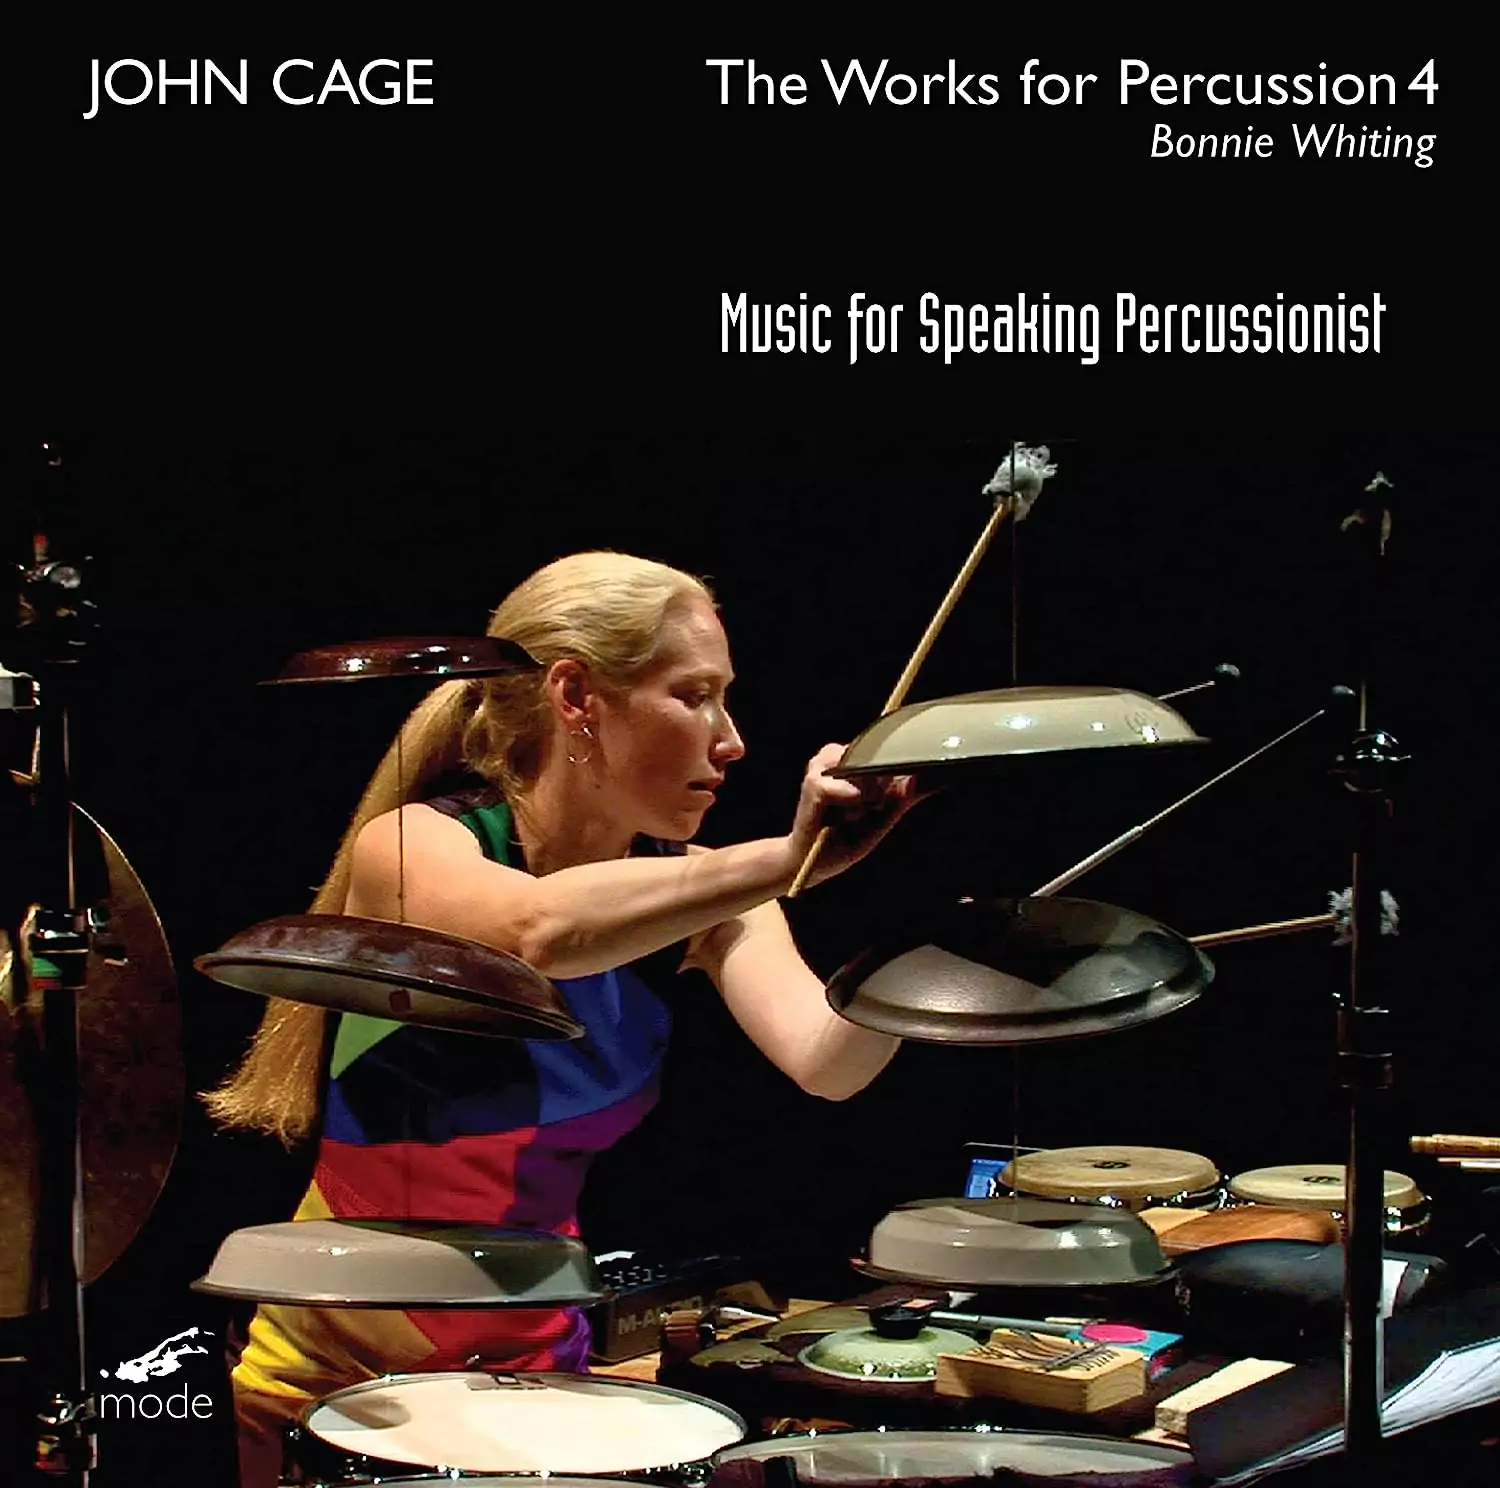 album art for Bonnie Whiting's album 'John Cage Vol. 4: Music for Speaking Percussionist Mode Records: 2017'